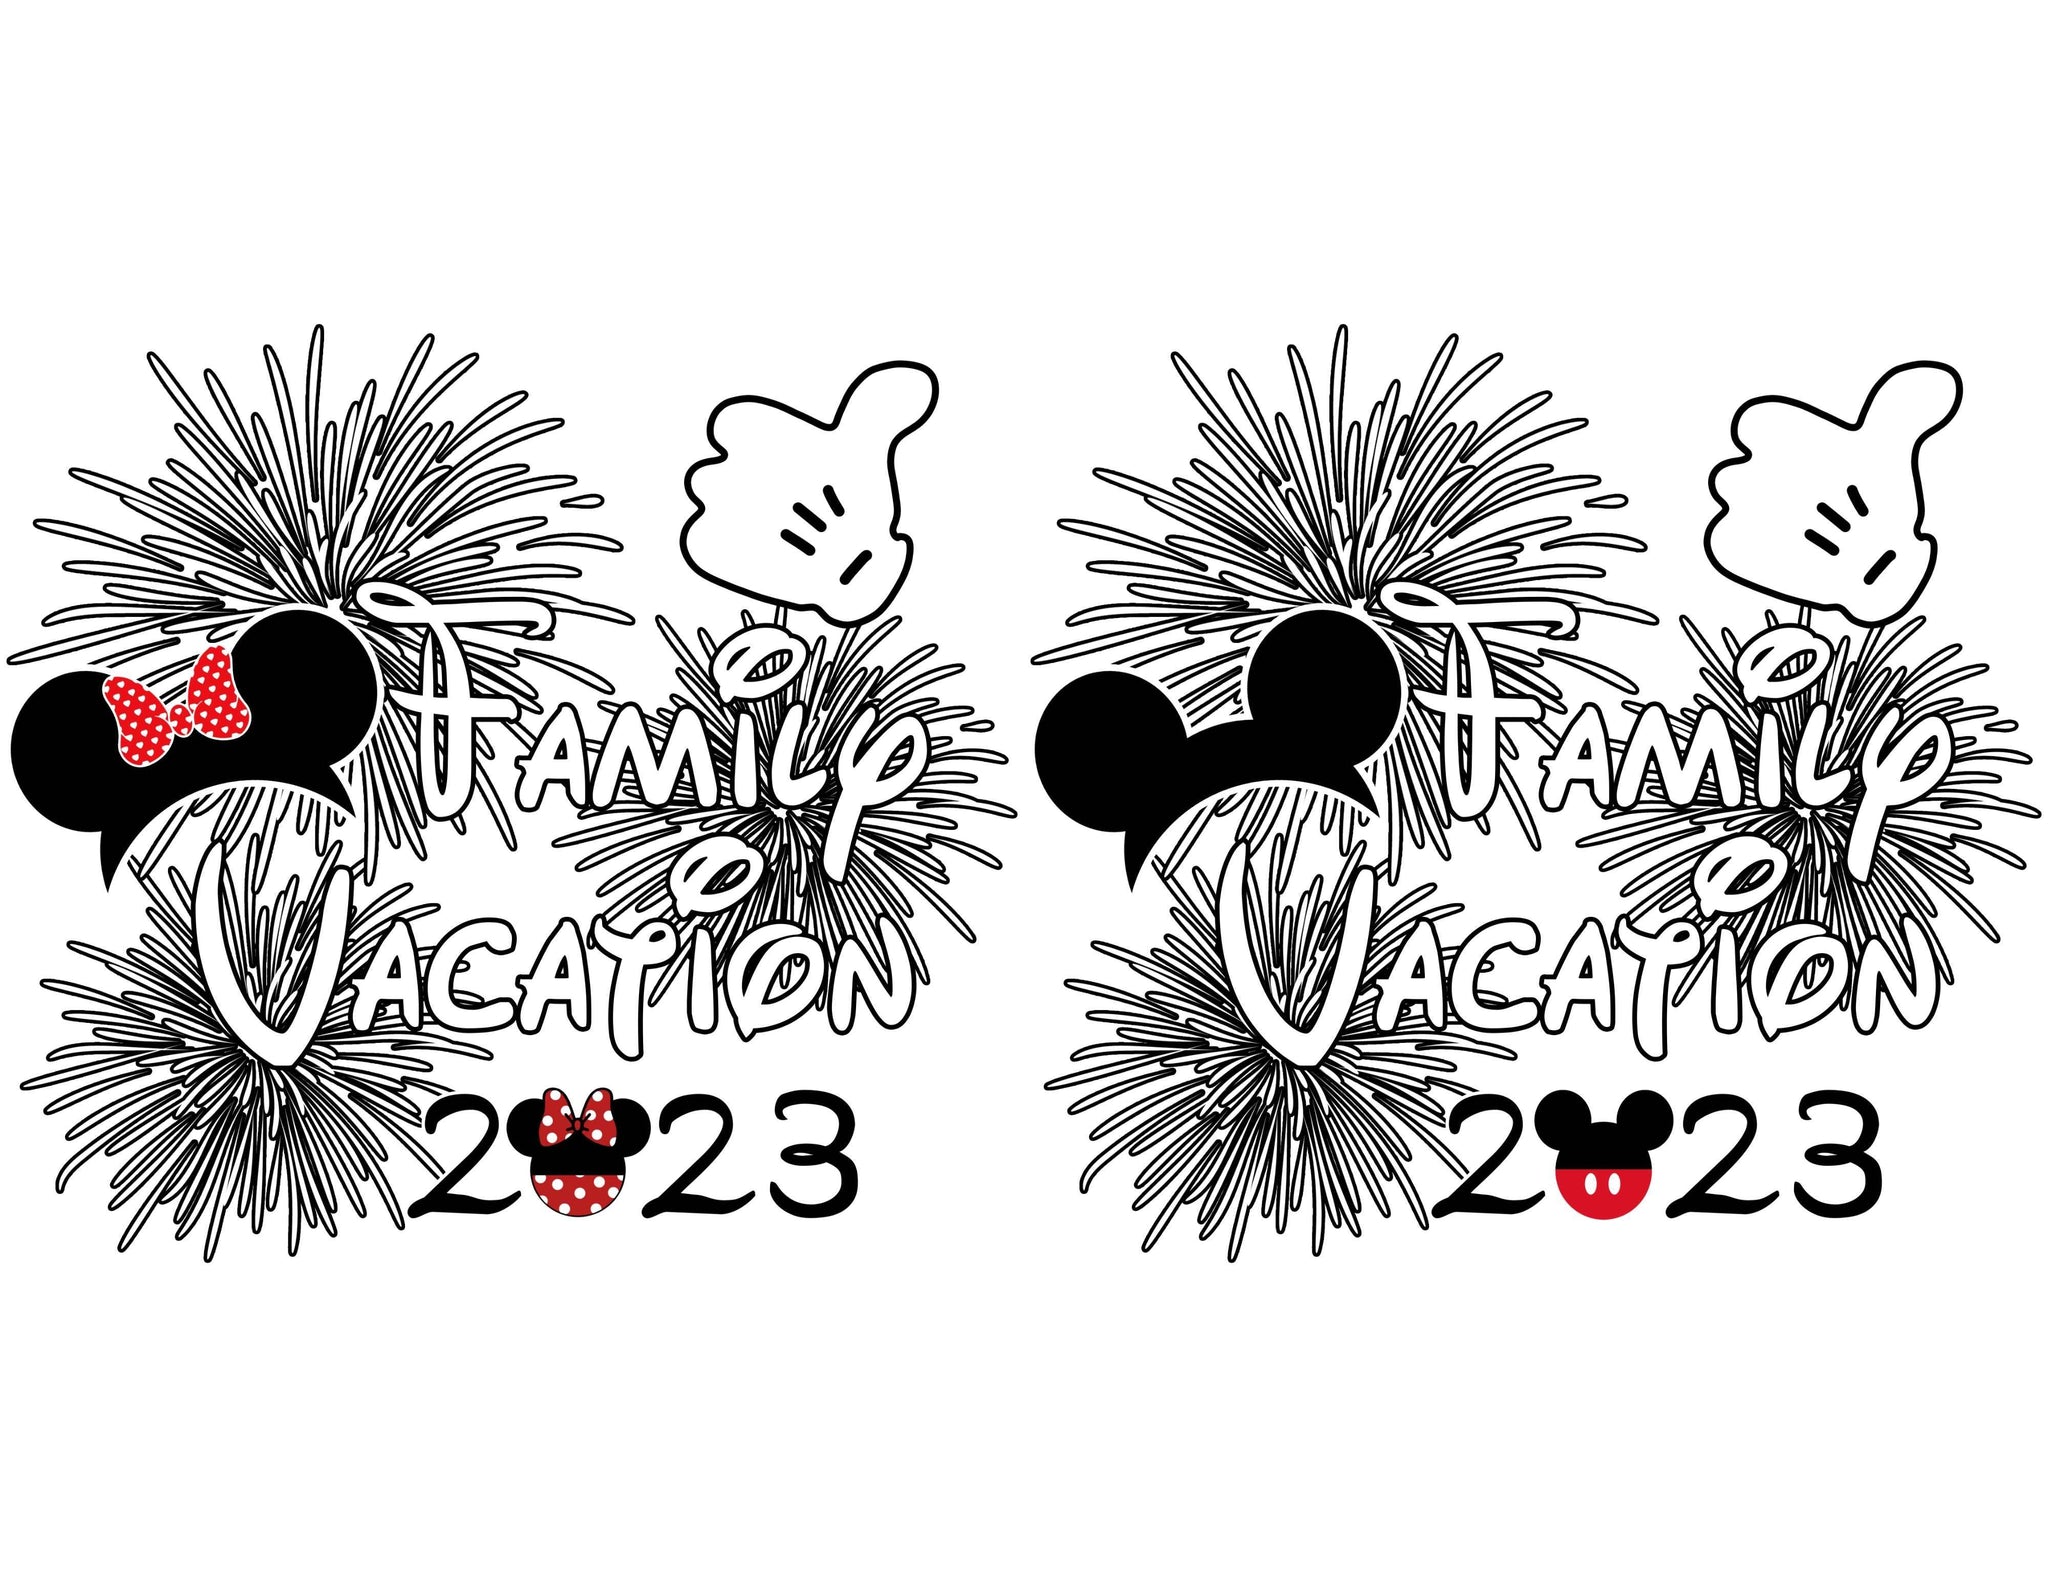 Disney Family Vacation 2023 Bundle PNG - Instant Download